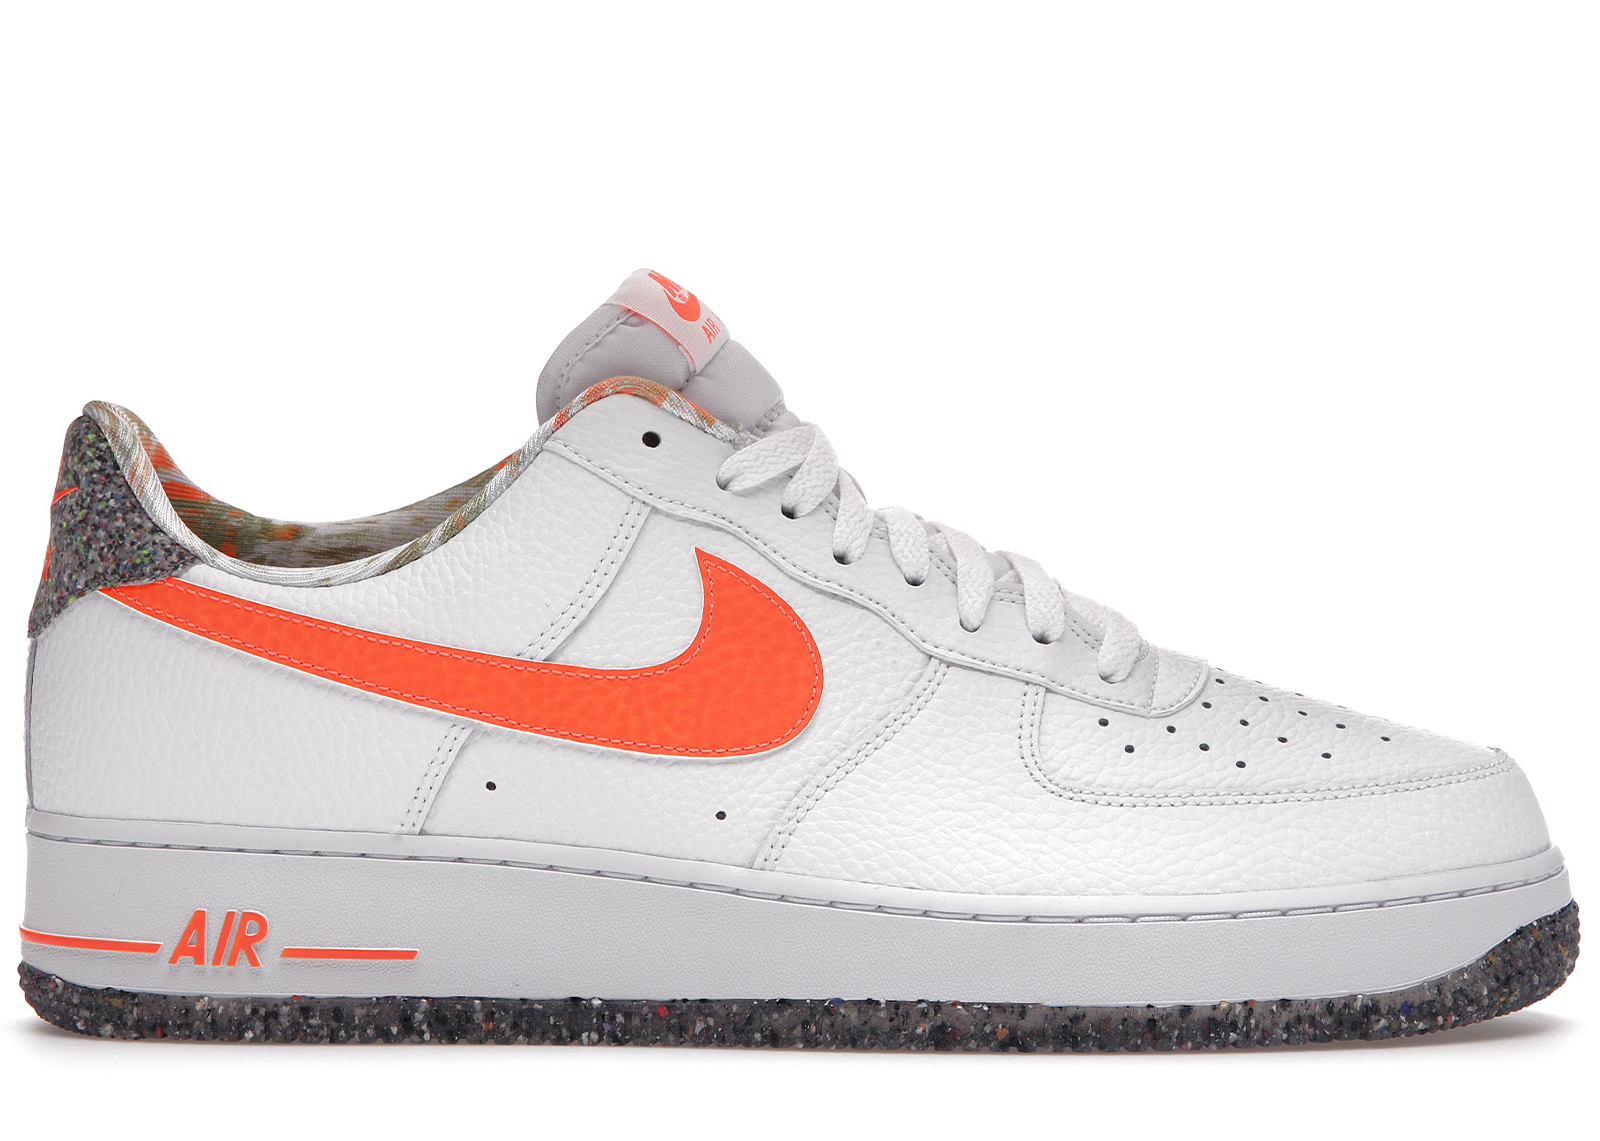 Nike Air Force 1 Men's Shoes - White